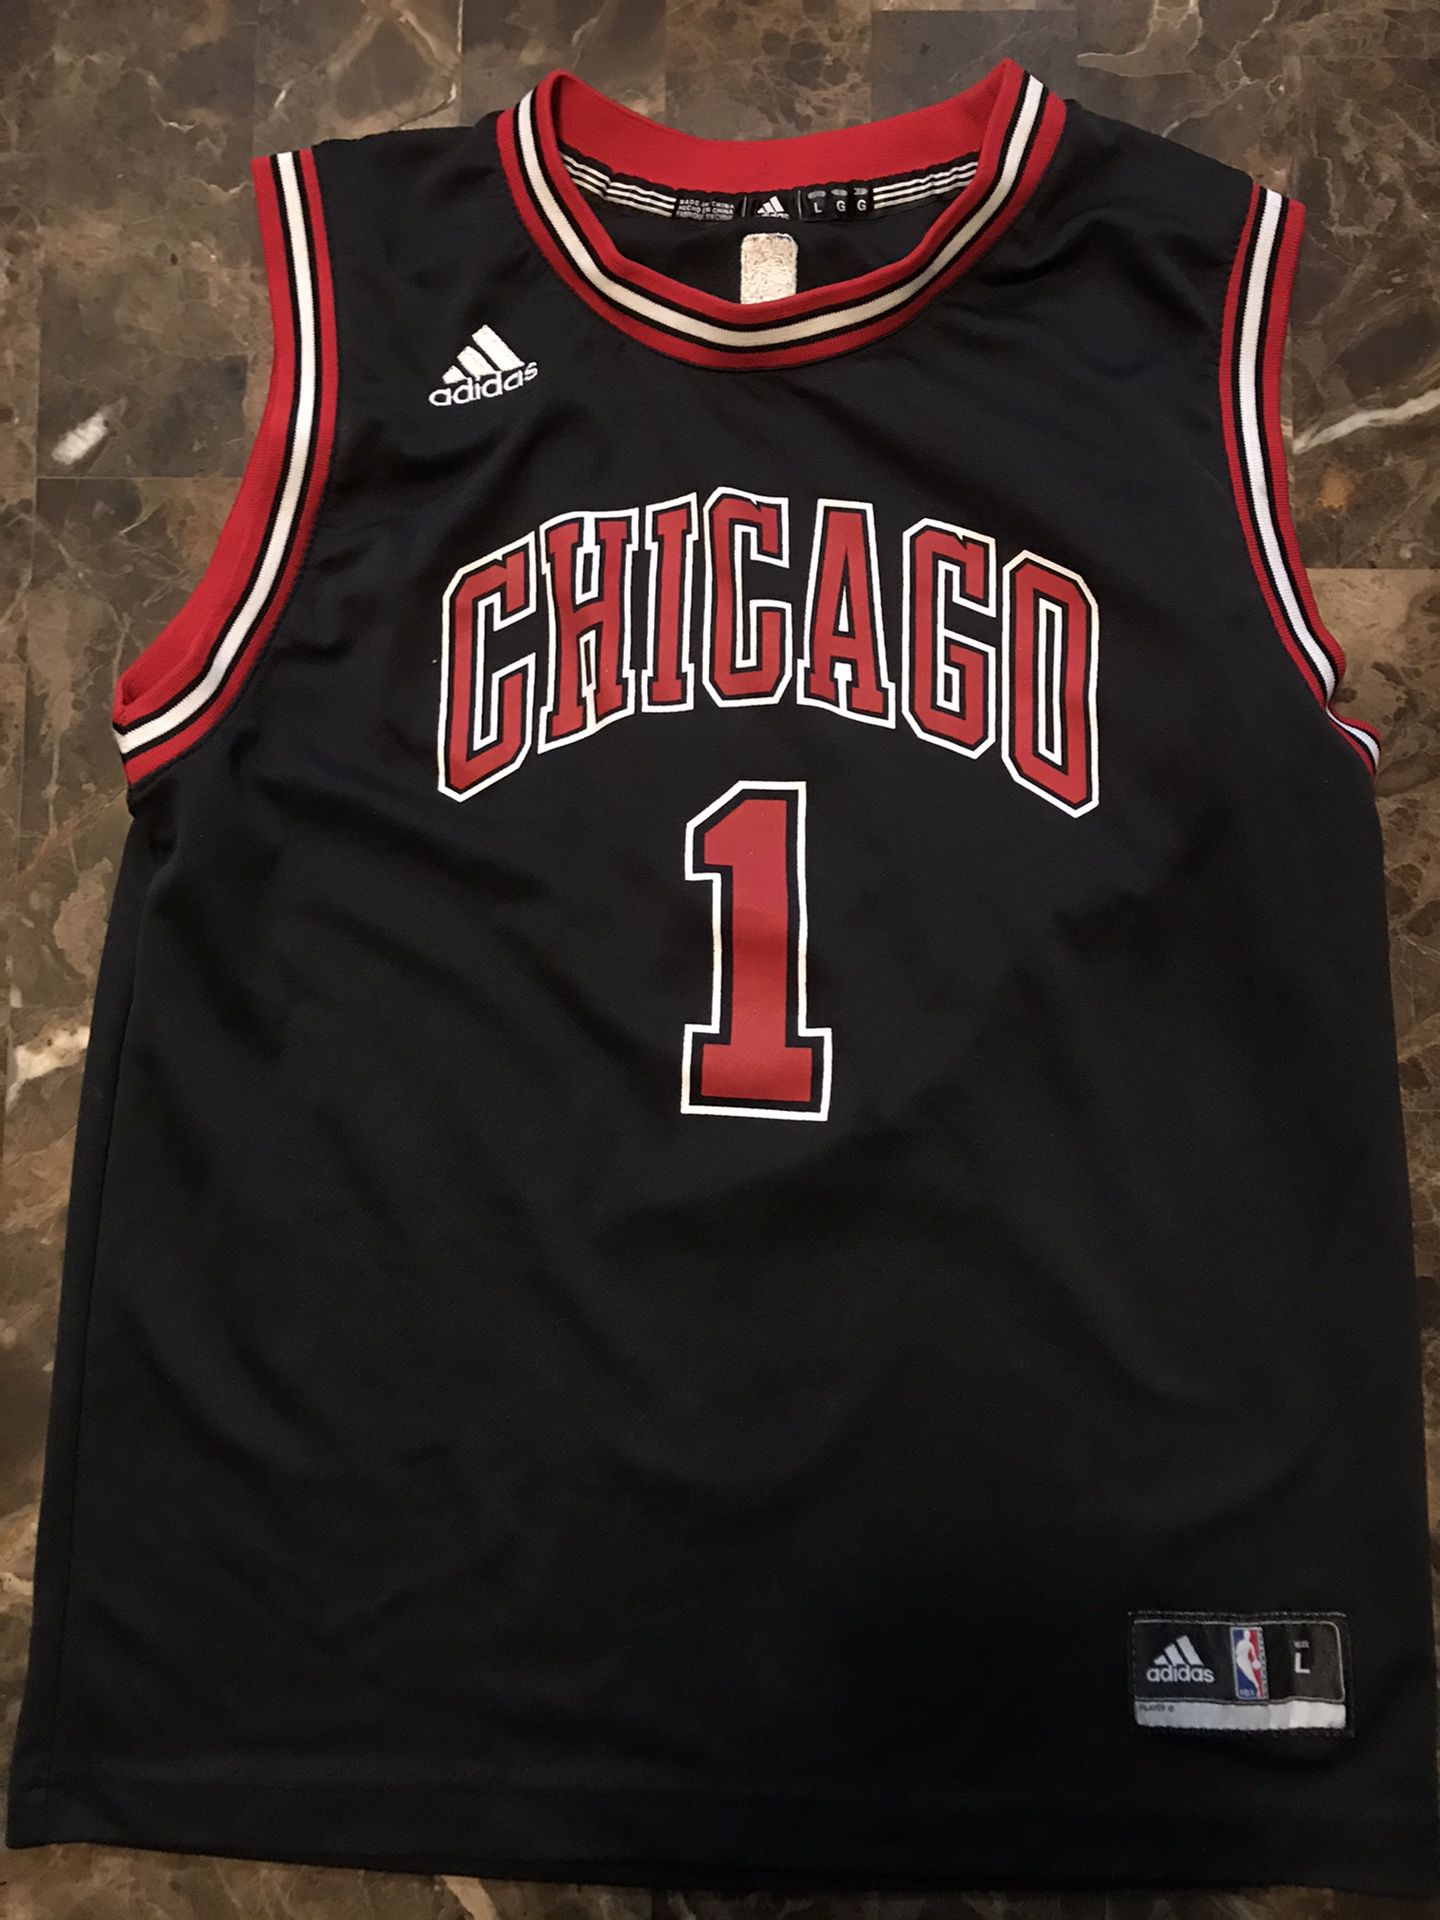 Derrick Rose Chicago Bulls Jersey for Sale in Northbrook, IL - OfferUp